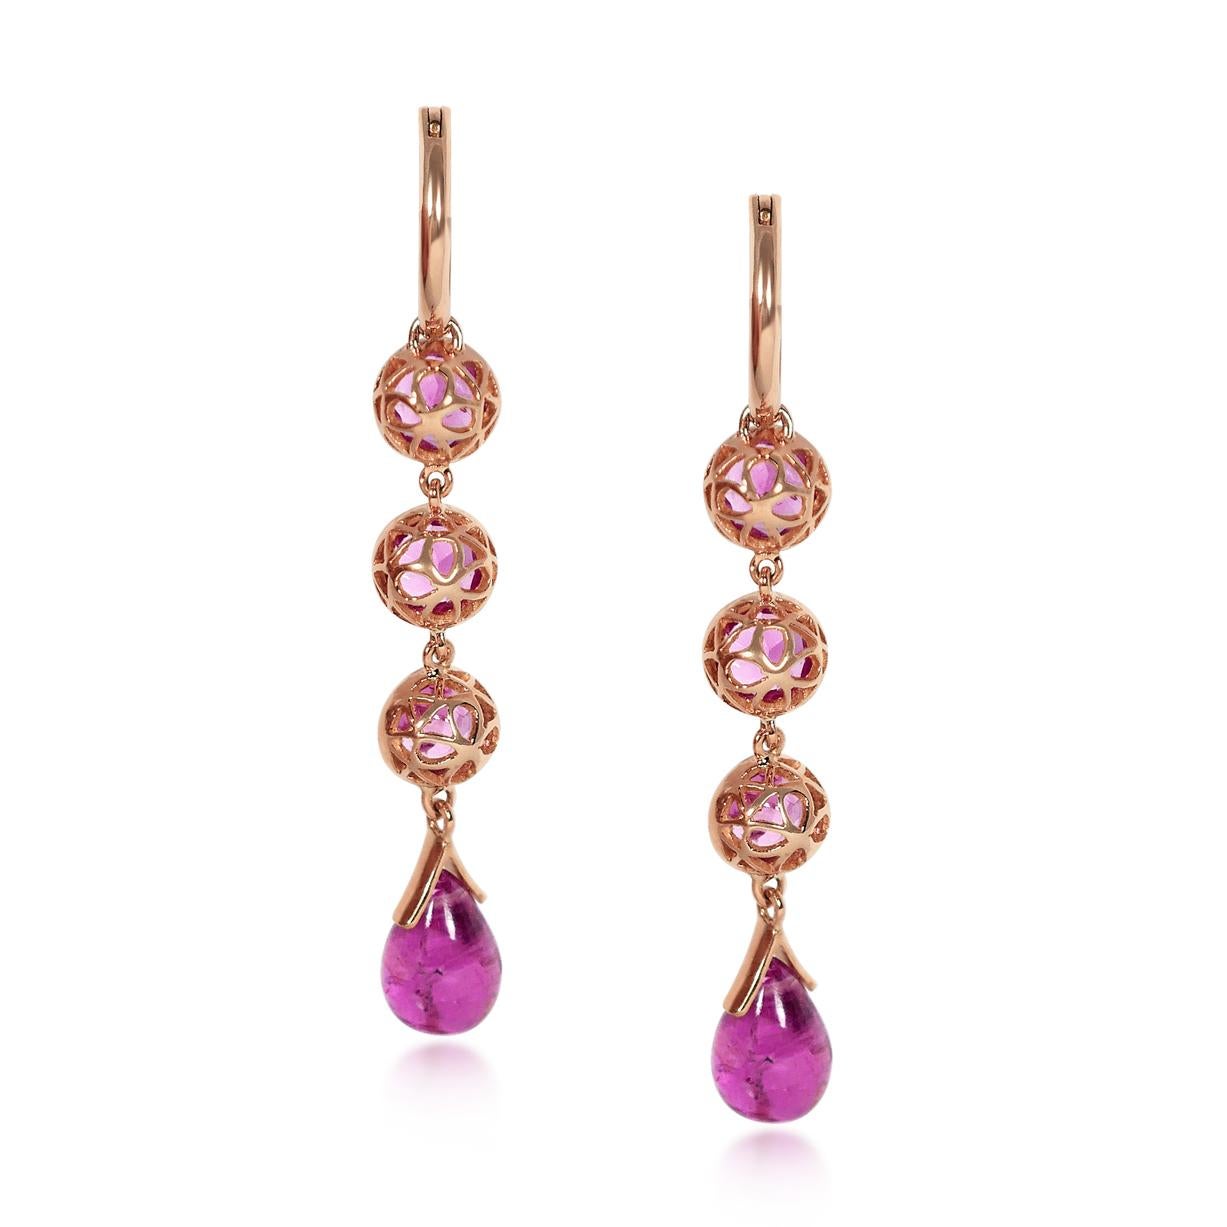 Contemporary Handcrafted 1.50 Carats Pink Tourmaline 18 Karat Rose Gold Drop Earrings For Sale